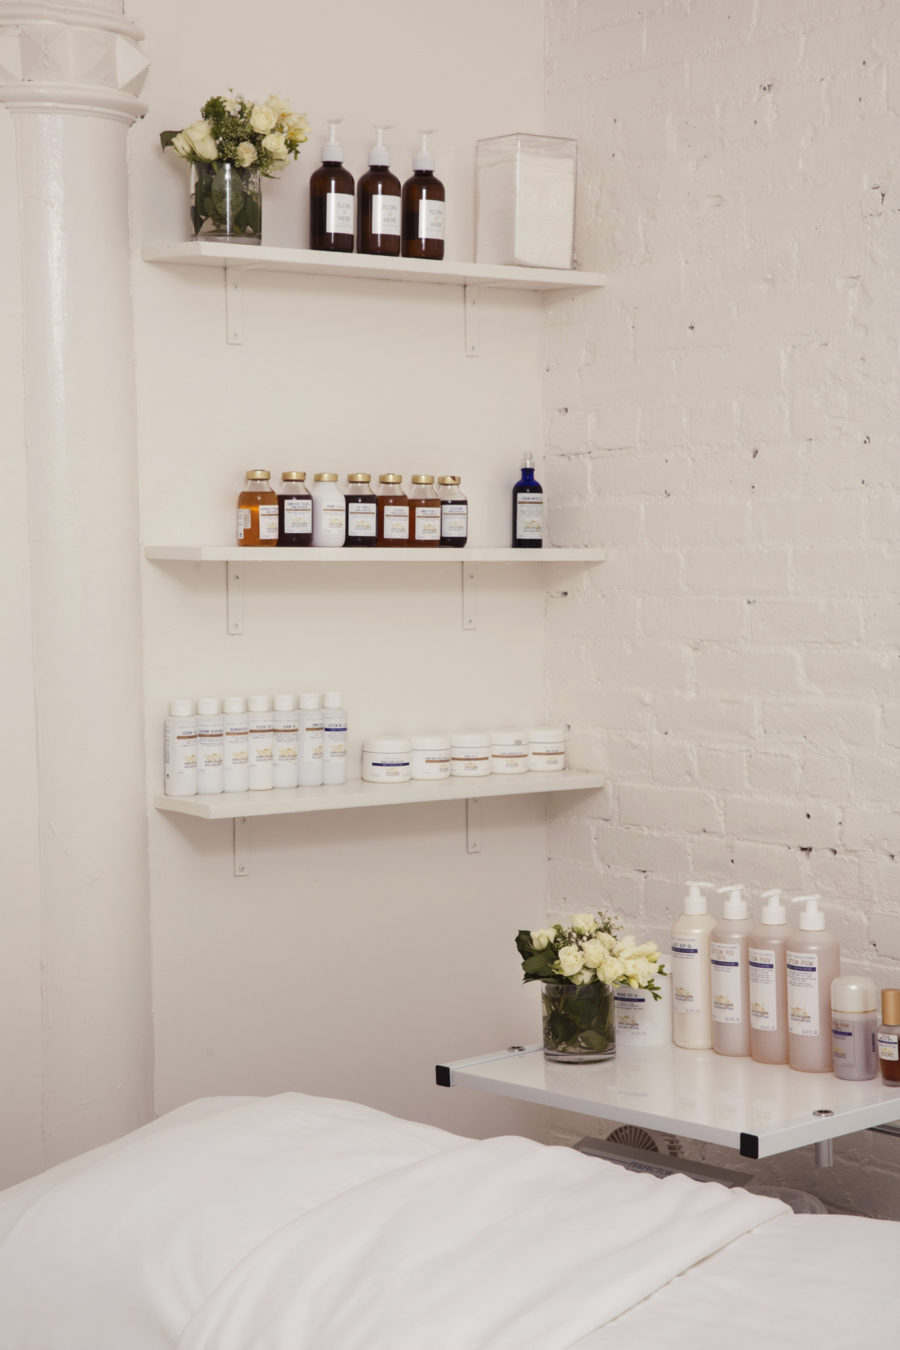 This is what happened when I tried an expensive facial at Daphne Studio in NYC, Daphne Studio NYC // Notjessfashion